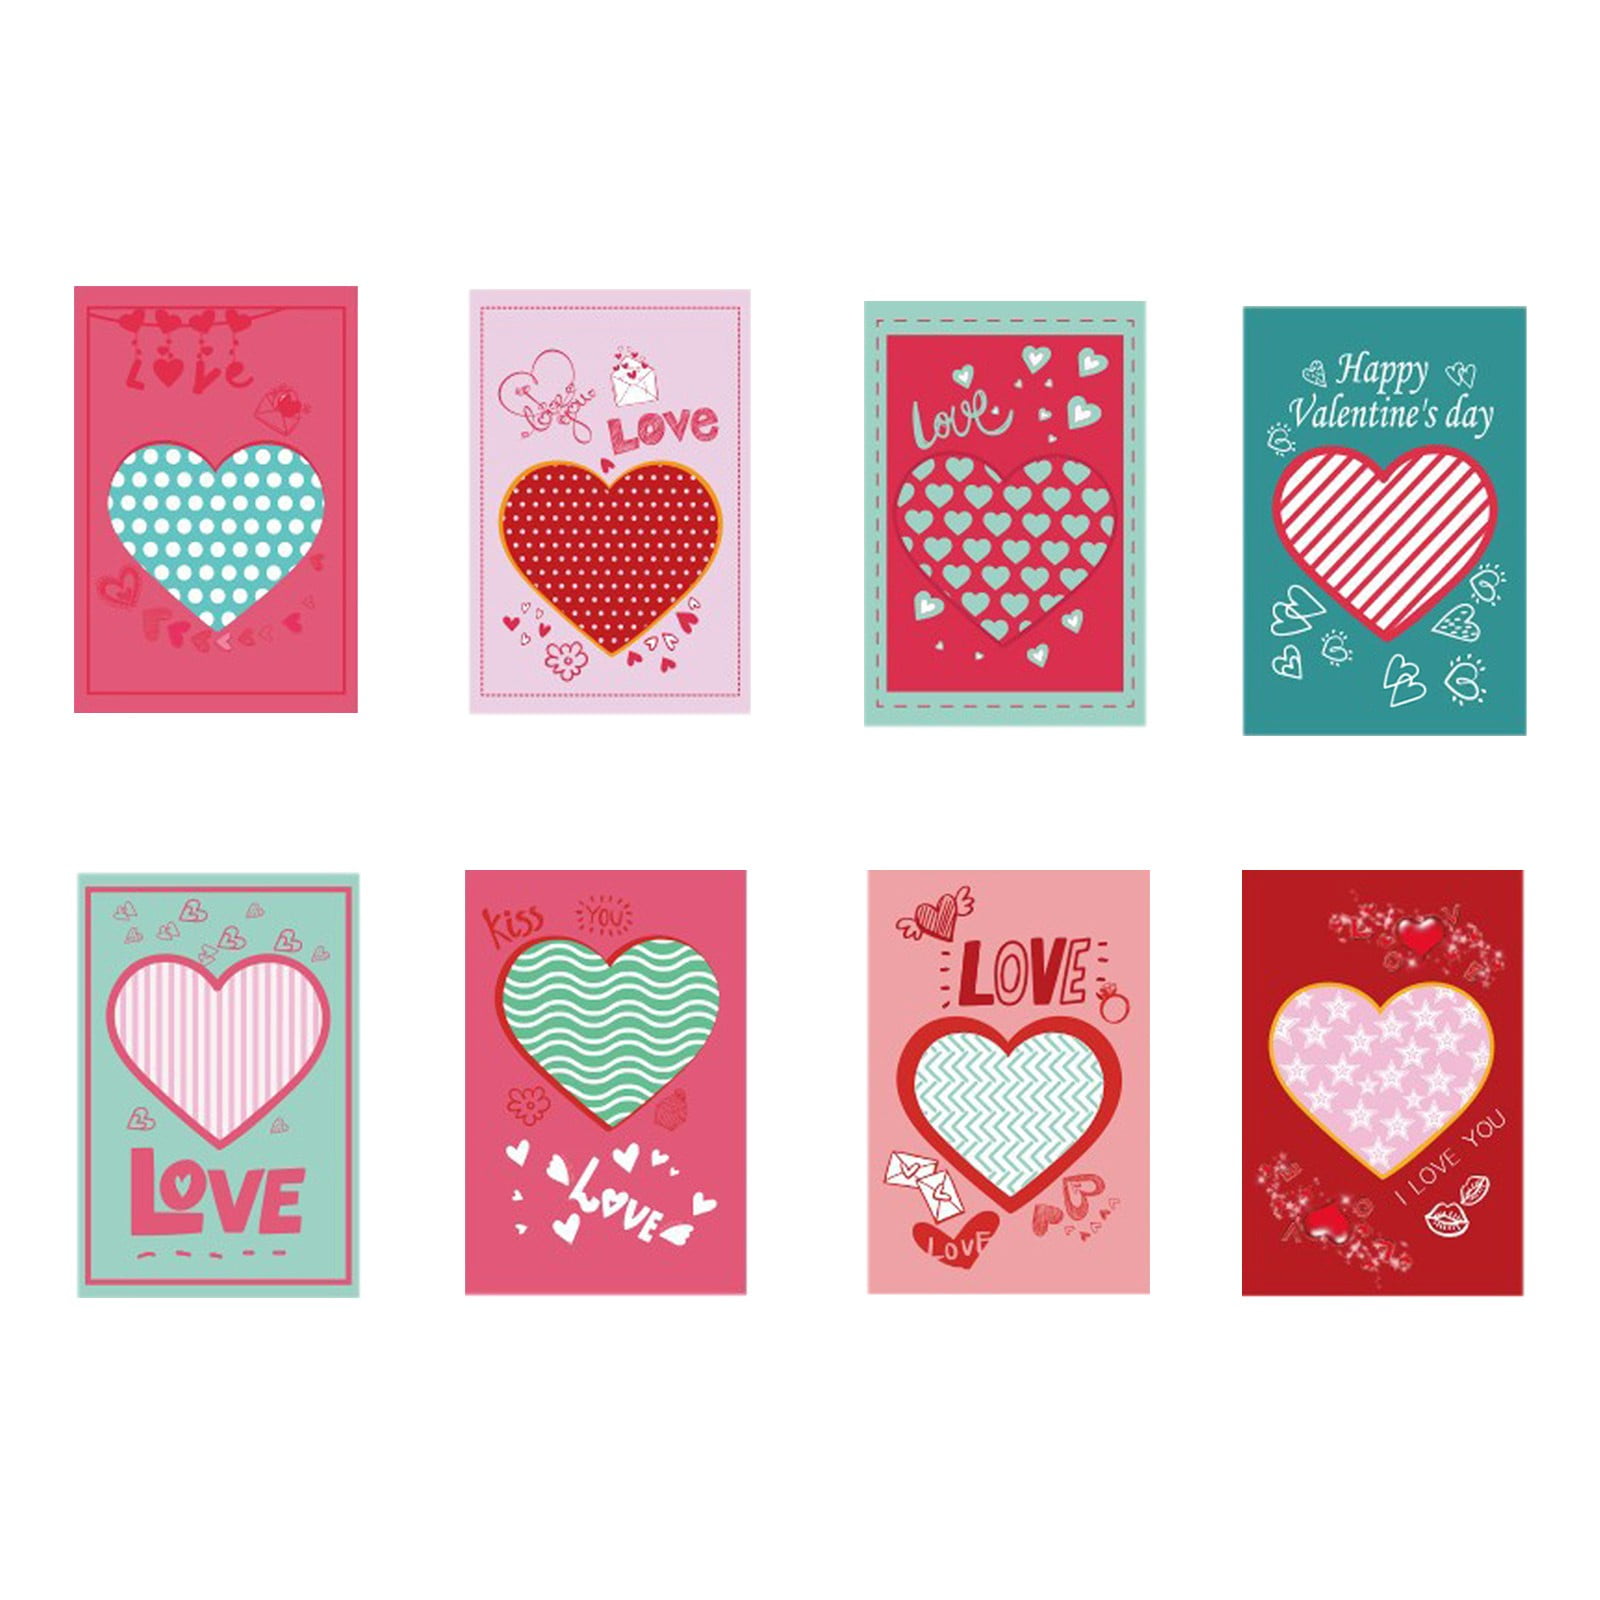 MAGICLULU 12 Pcs Love Greeting Card Small Cards Wedding Gift Cards  Valentines Day Sympathy Cards Giftscards Valentines Day Her Him Mothers  Thank u